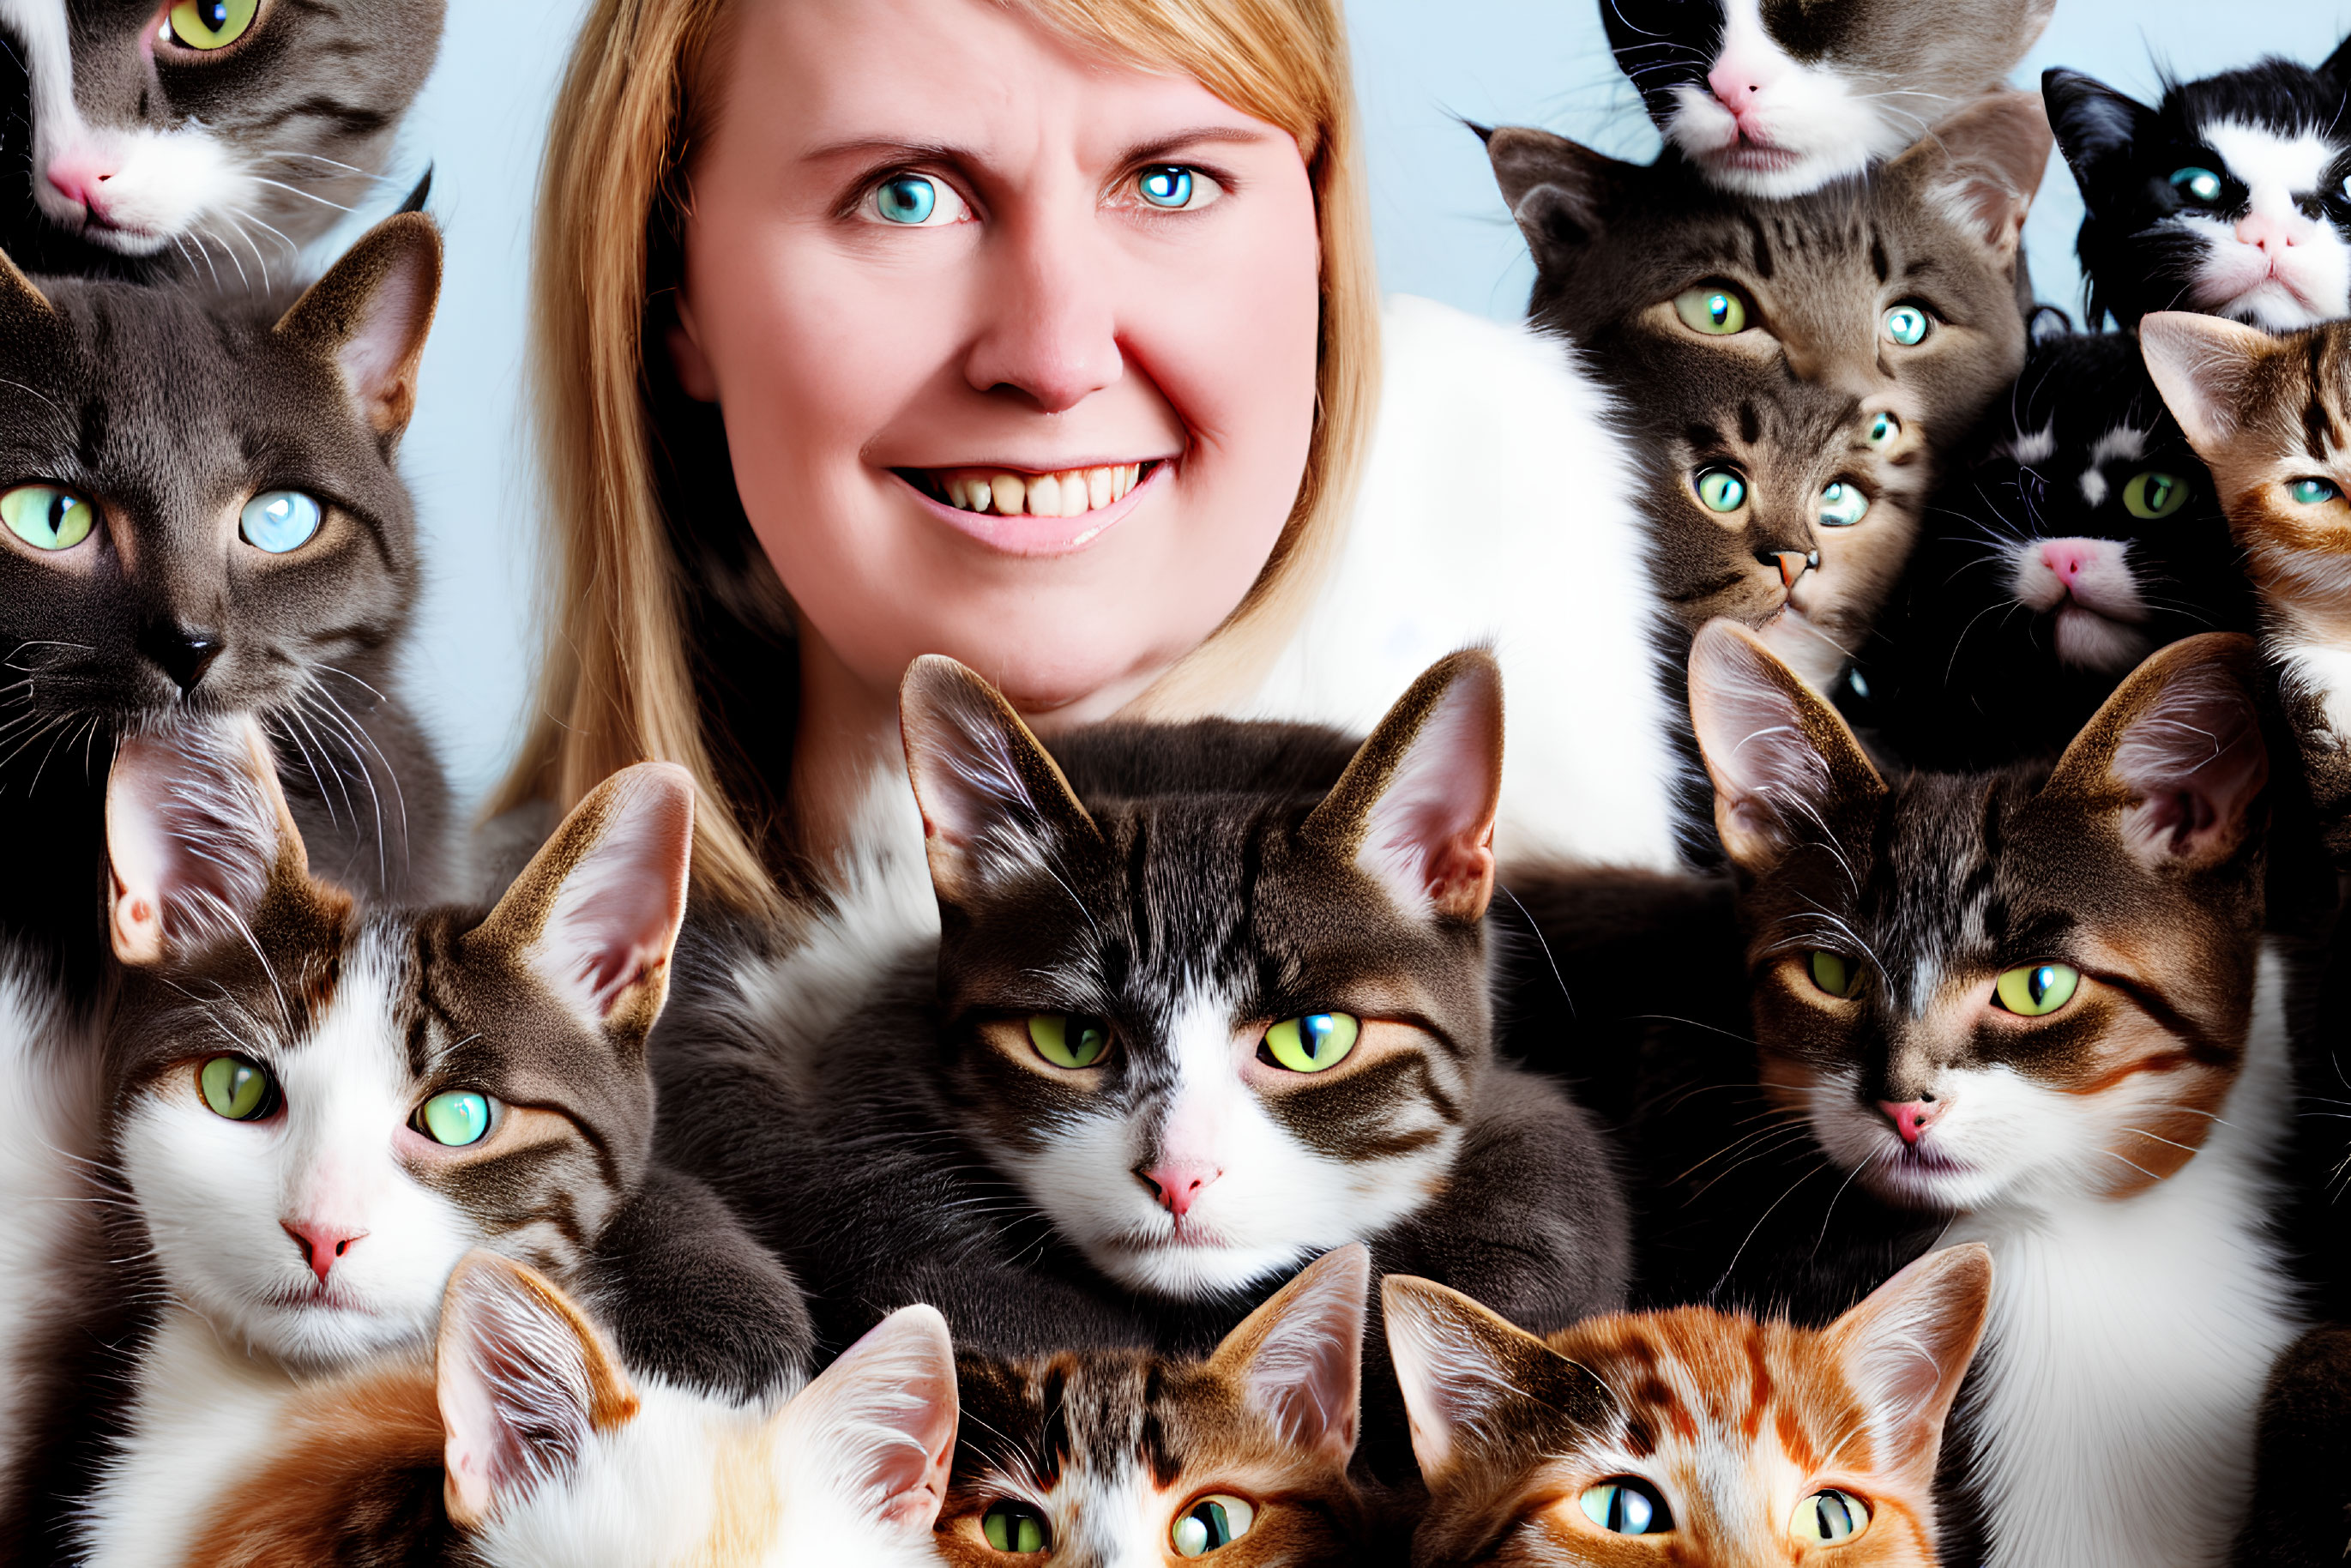 Smiling woman with multiple patterned cats in a photo